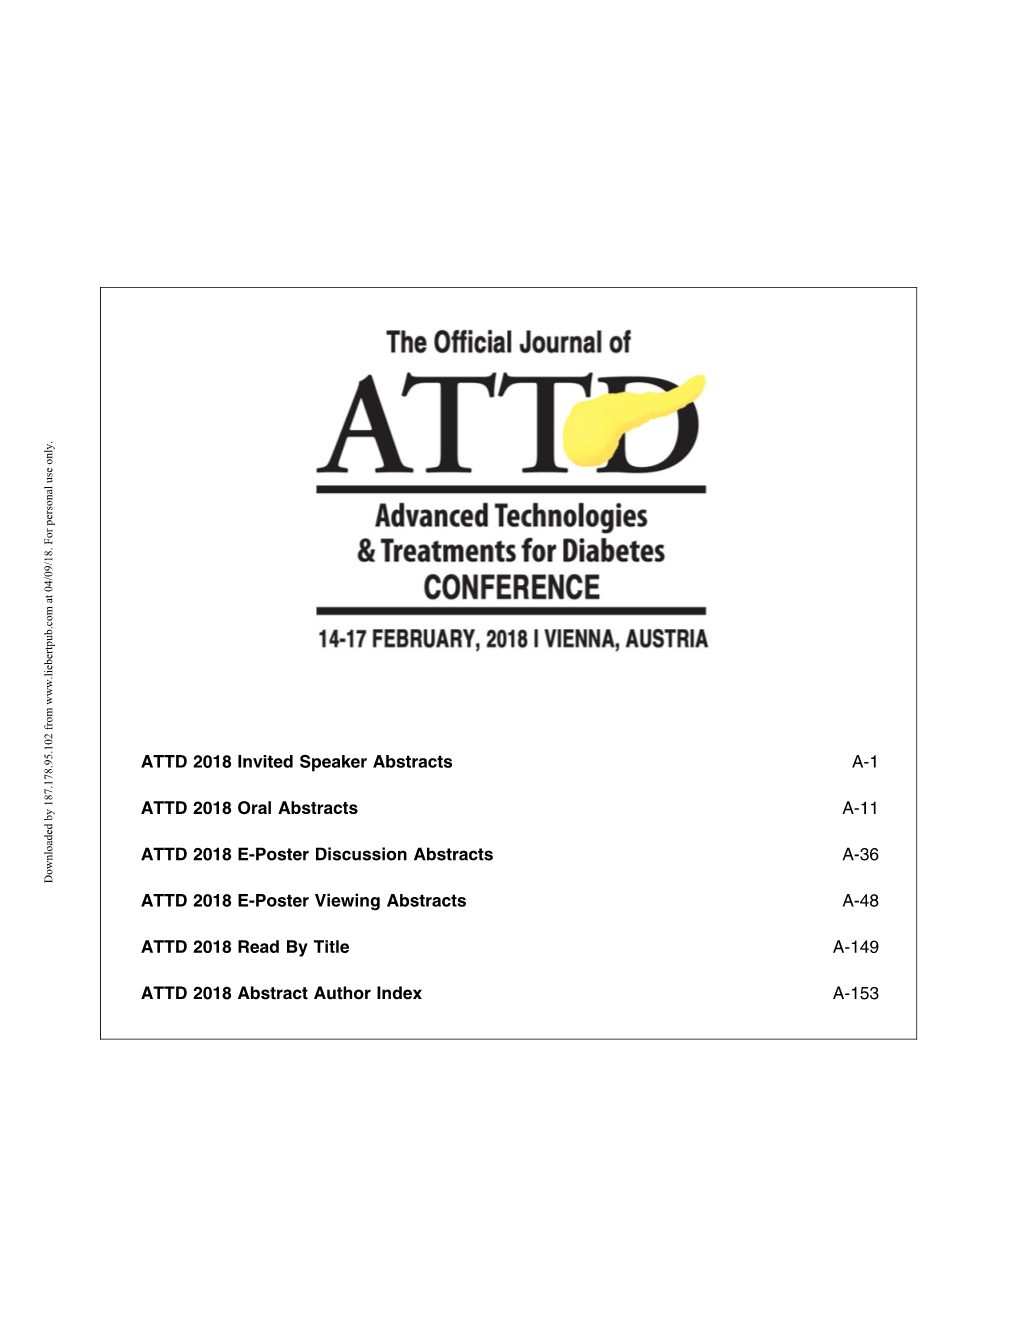 The Official Journal of ATTD Advanced Technologies